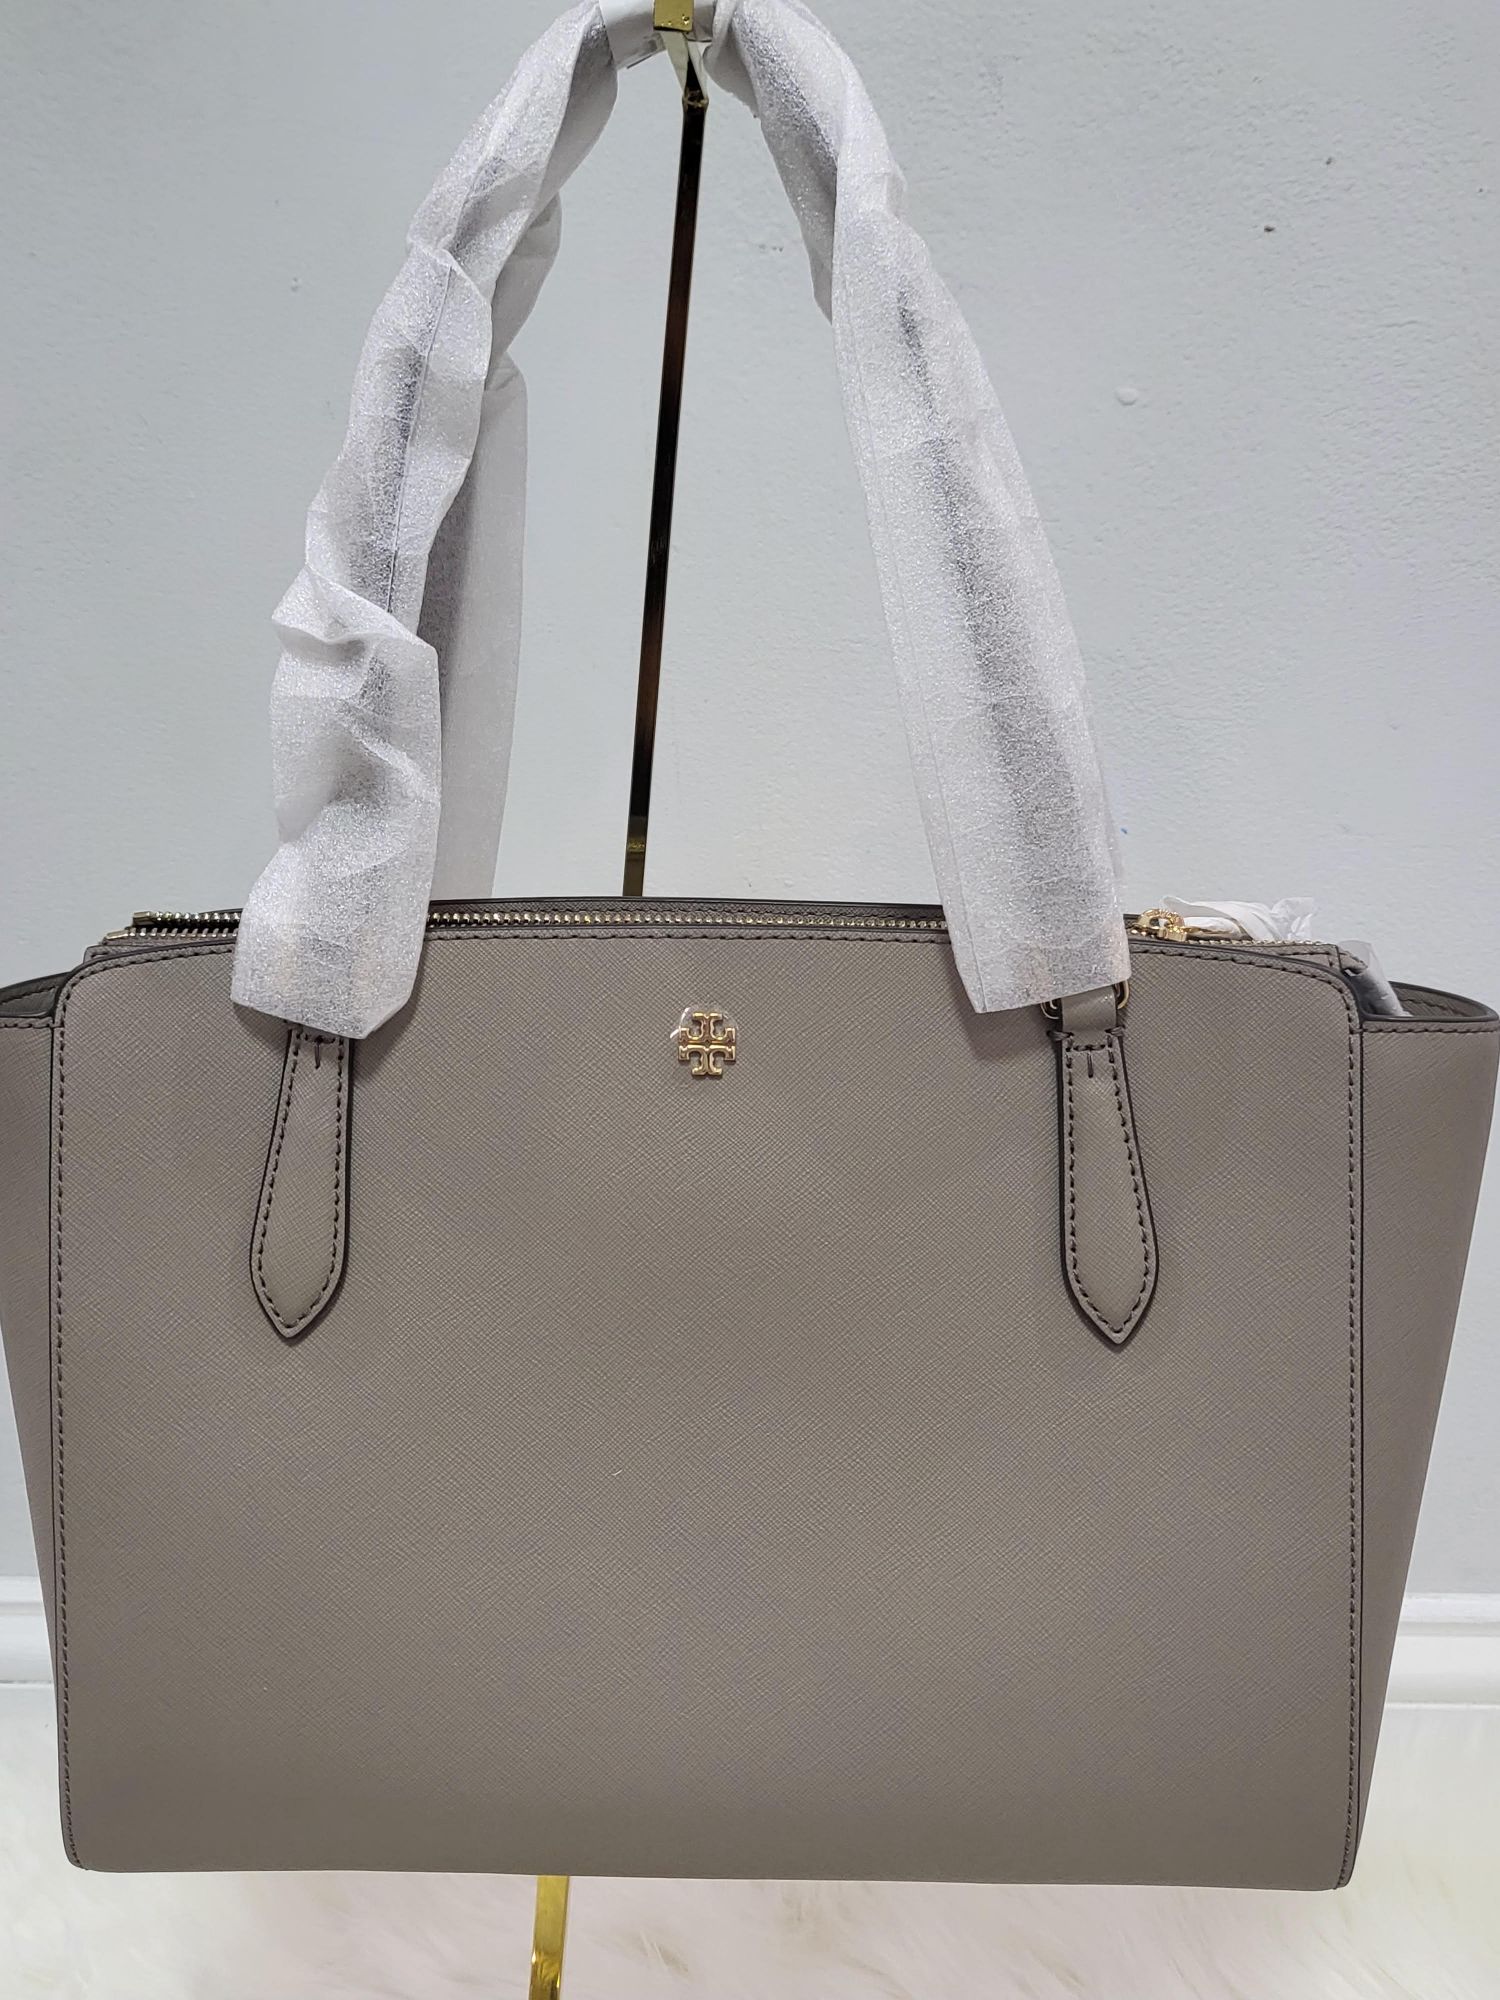 Tory Burch Tote Bag Emerson Mini Top Zip Tote 2way Brown Leather